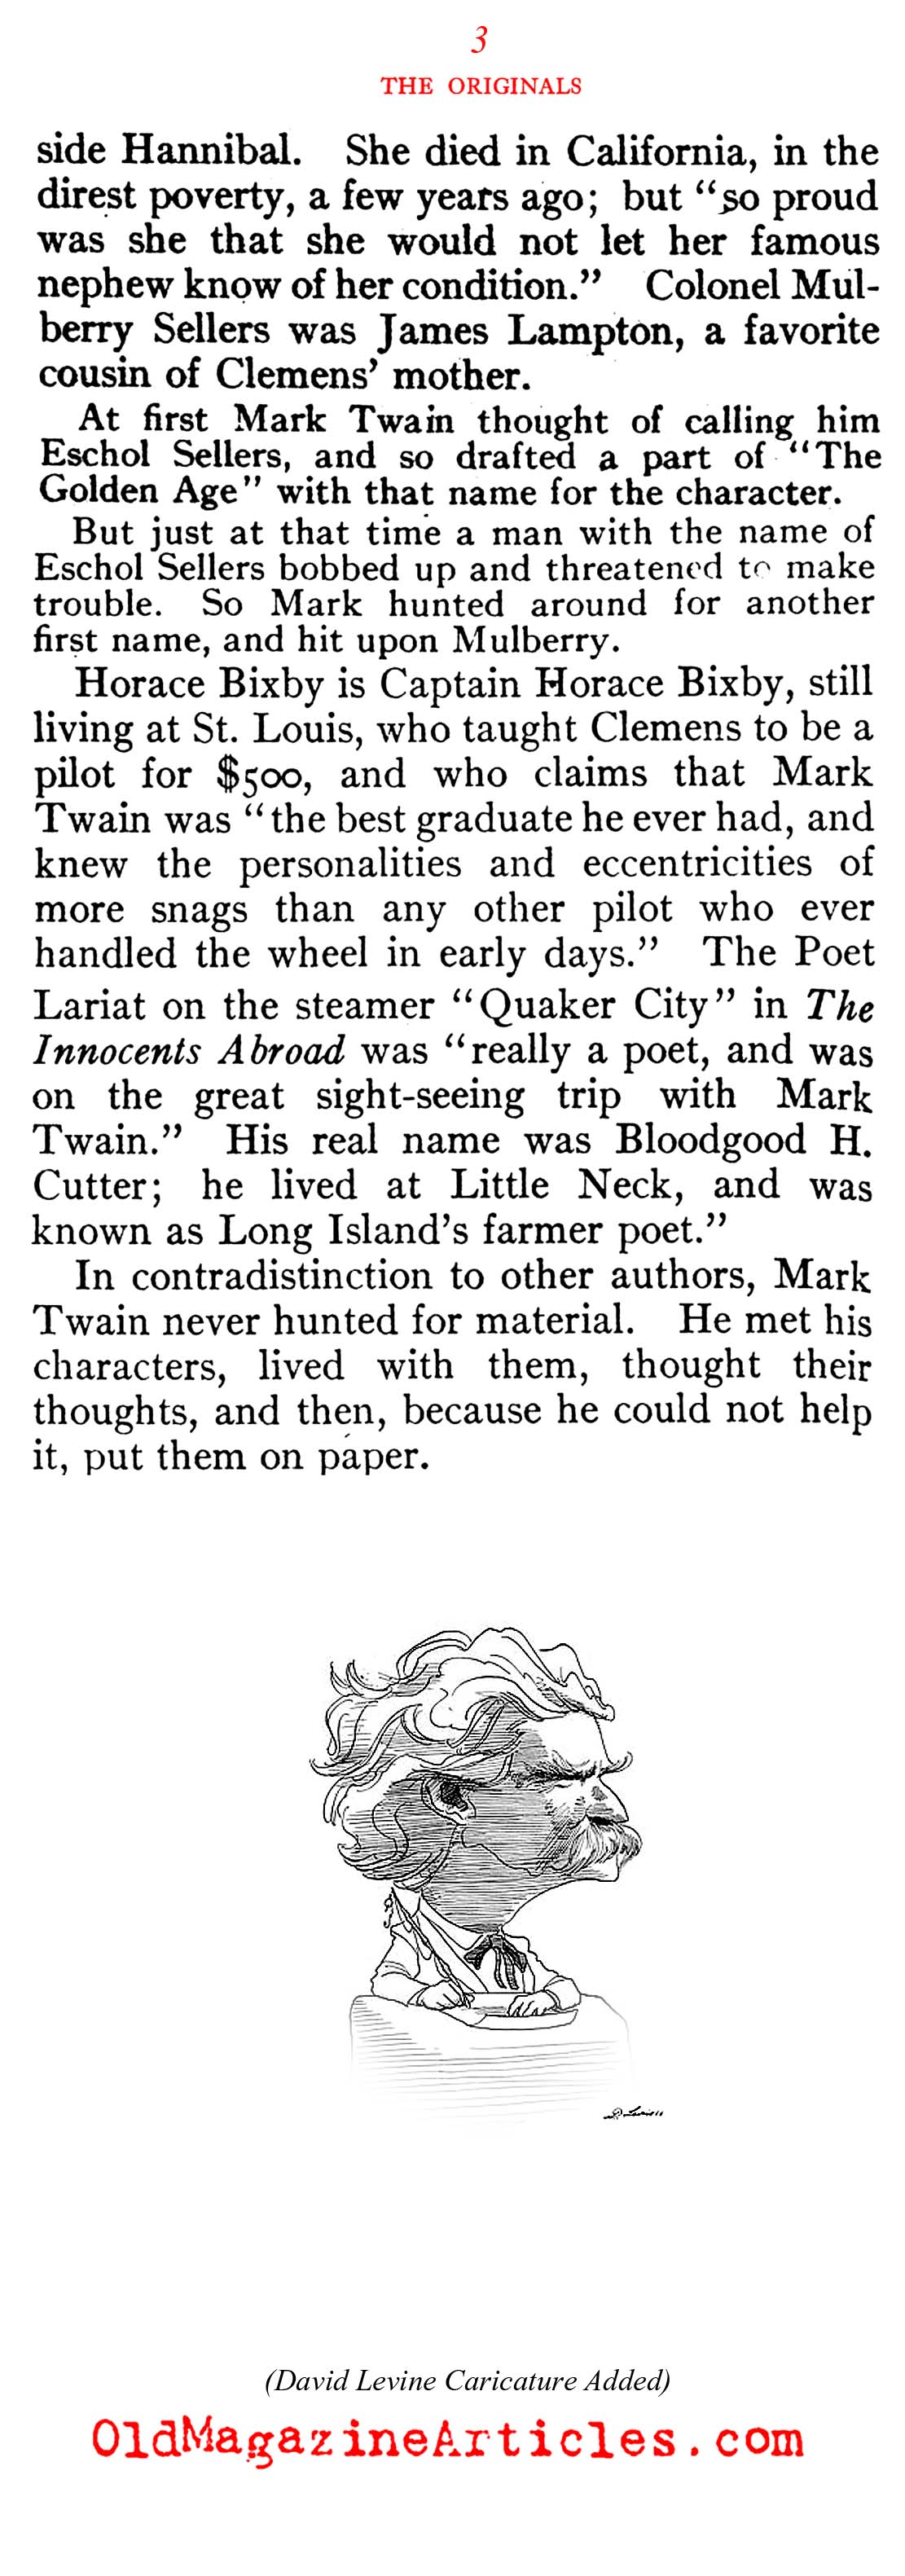 Those Who Inspired Mark Twain  (American Review of Reviews, 1910)